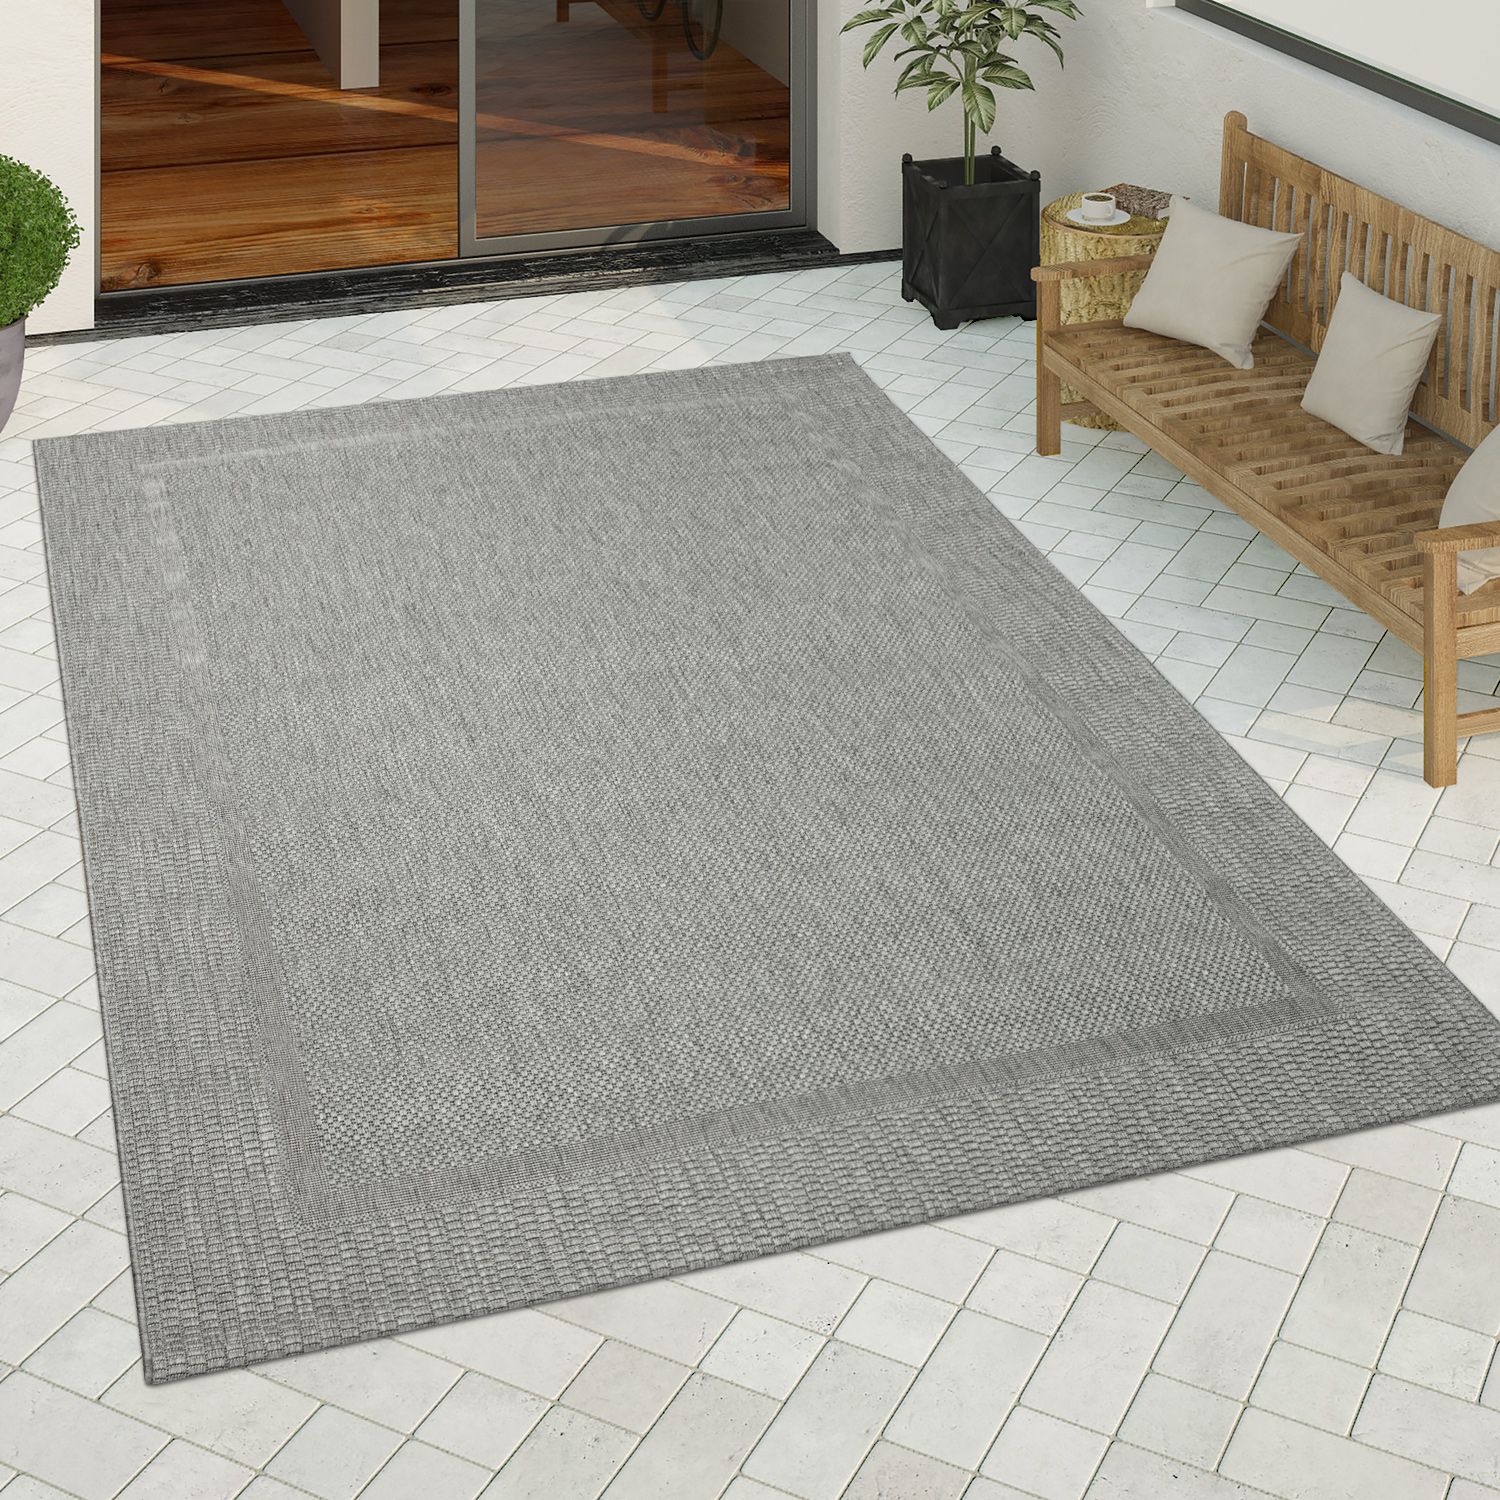 In- & Outdoor-Teppich Countryside Grau 